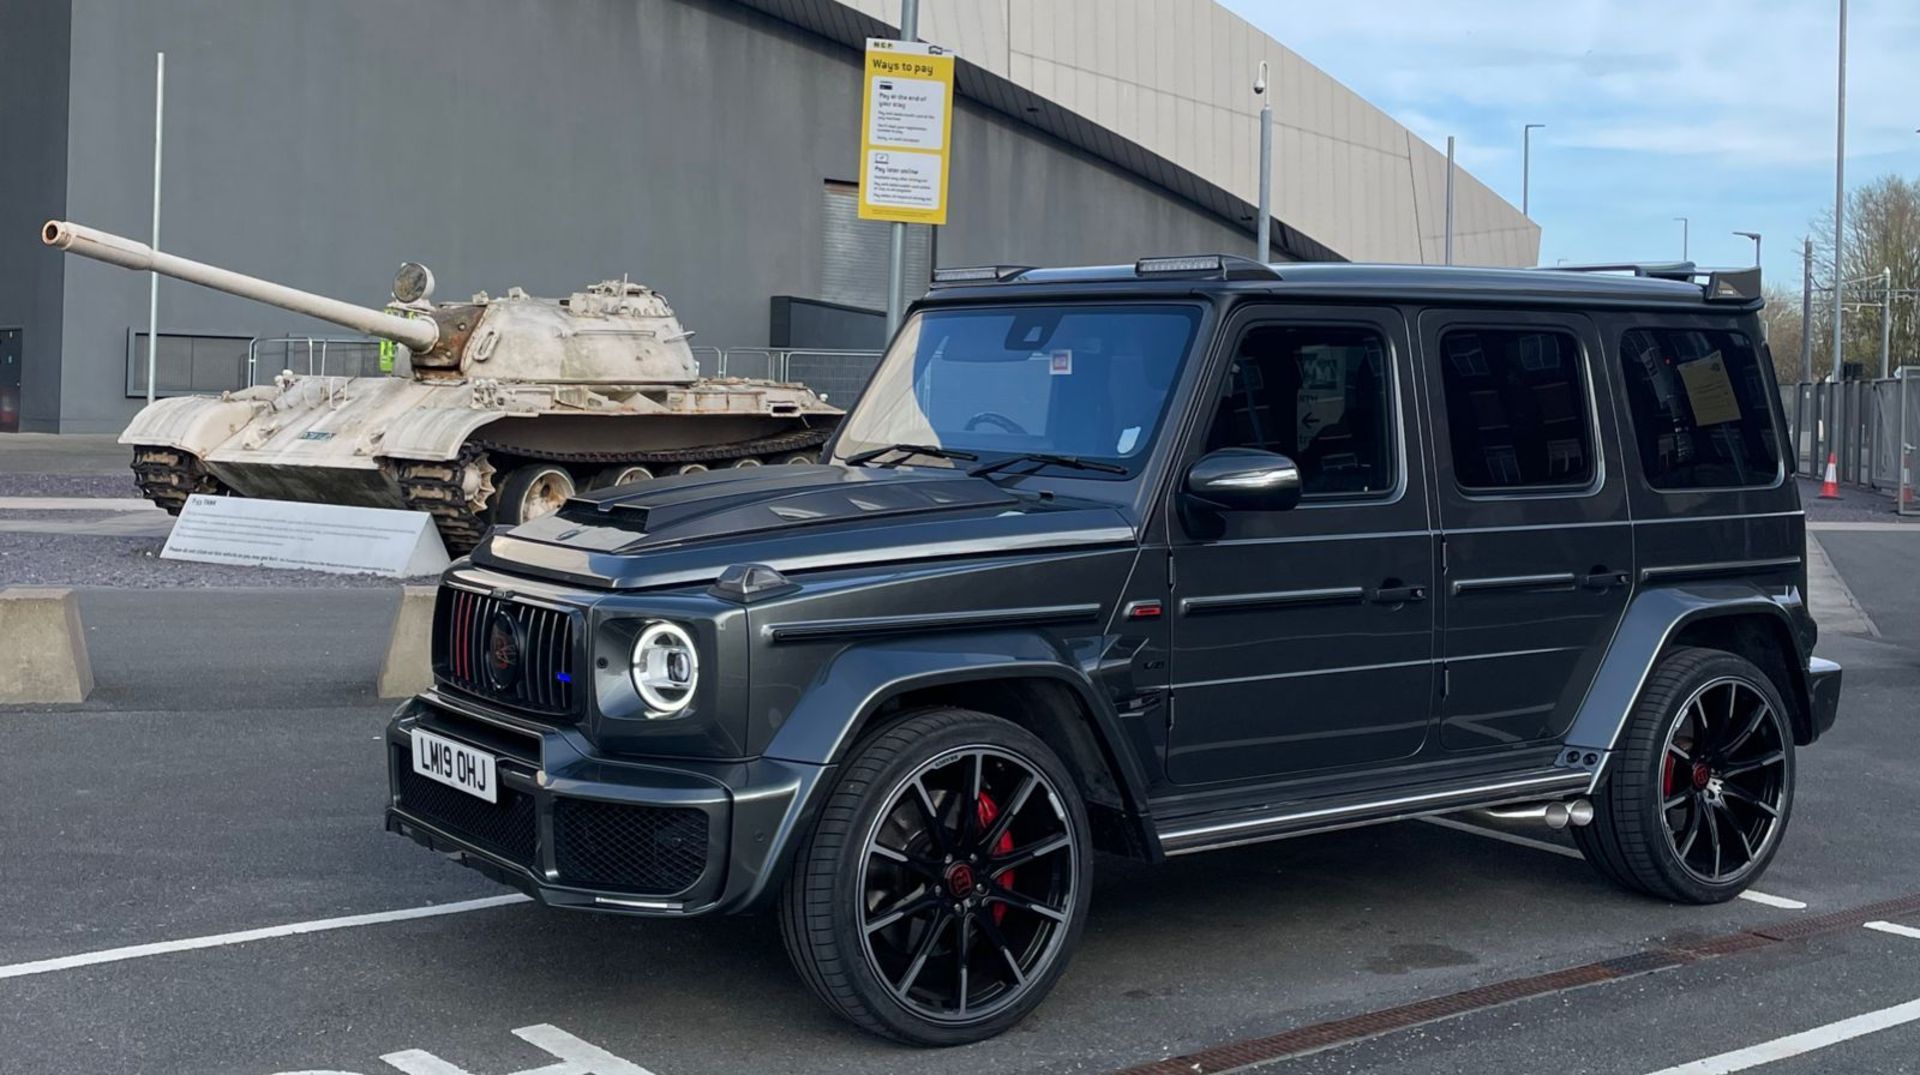 MERCEDES G63 BRABUS WIDE-STAR 800 STYLING GREY WITH BLACK LEATHER INTERIOR *PLUS VAT*